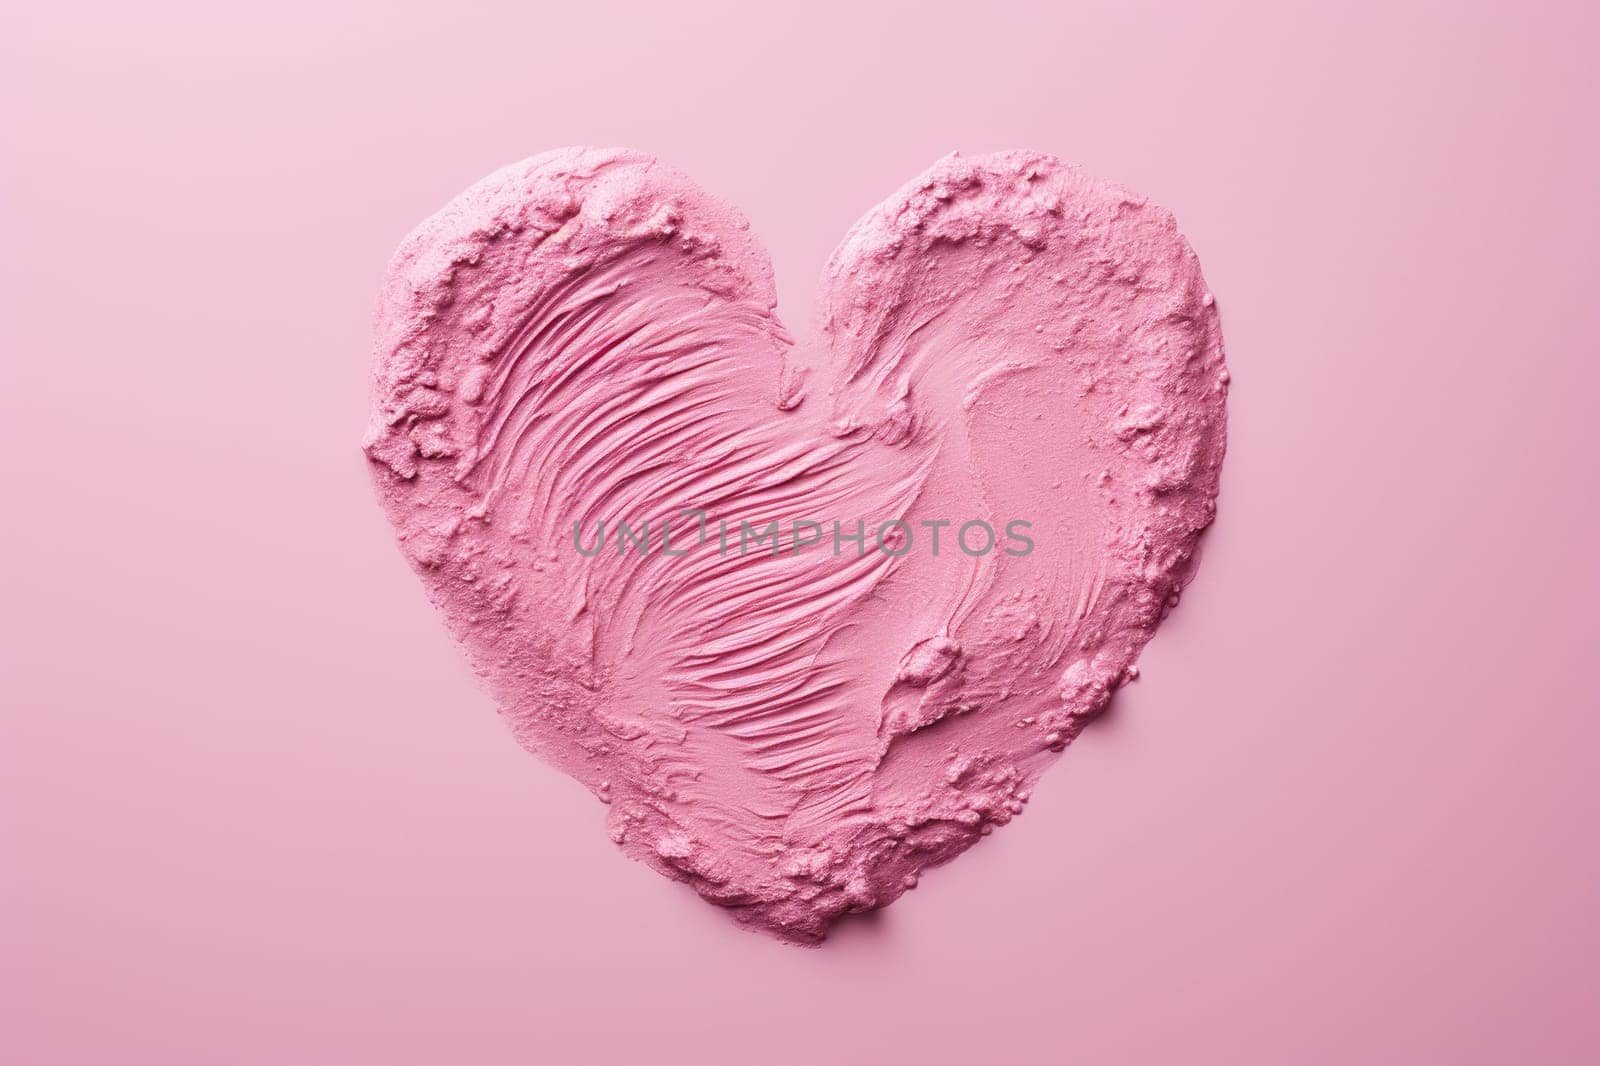 Pink heart with paints texture on a pink background.